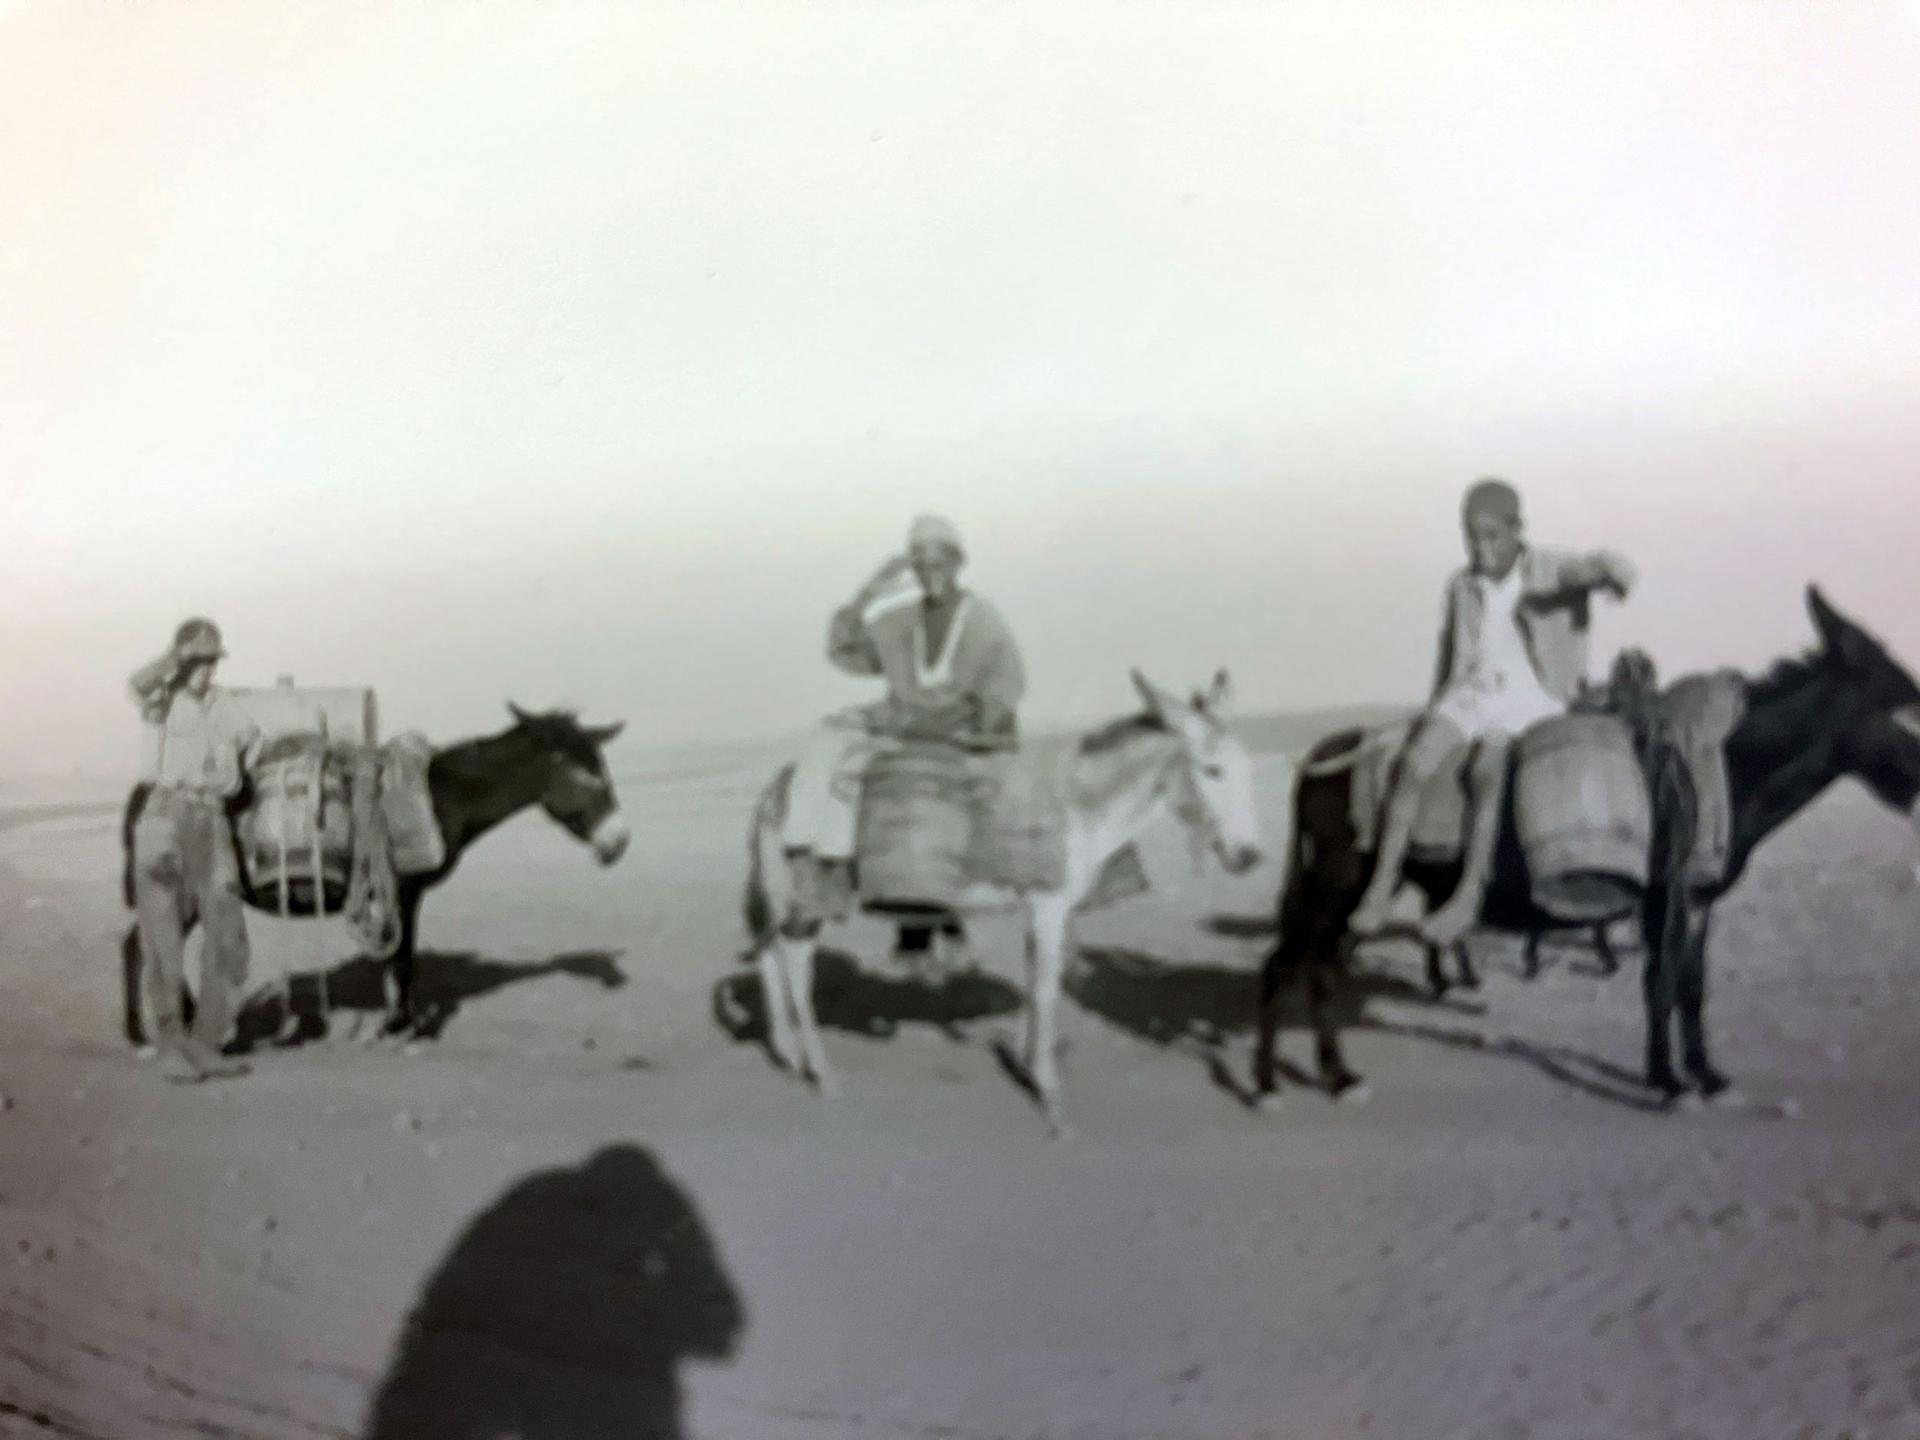 Three young men ride donkeys in the Algerian desert. In April 1943, Manuel E. Lichtenstein, a doctor in Chicago, went to Algeria for five months of training before heading to Italy to set up field hospitals. 